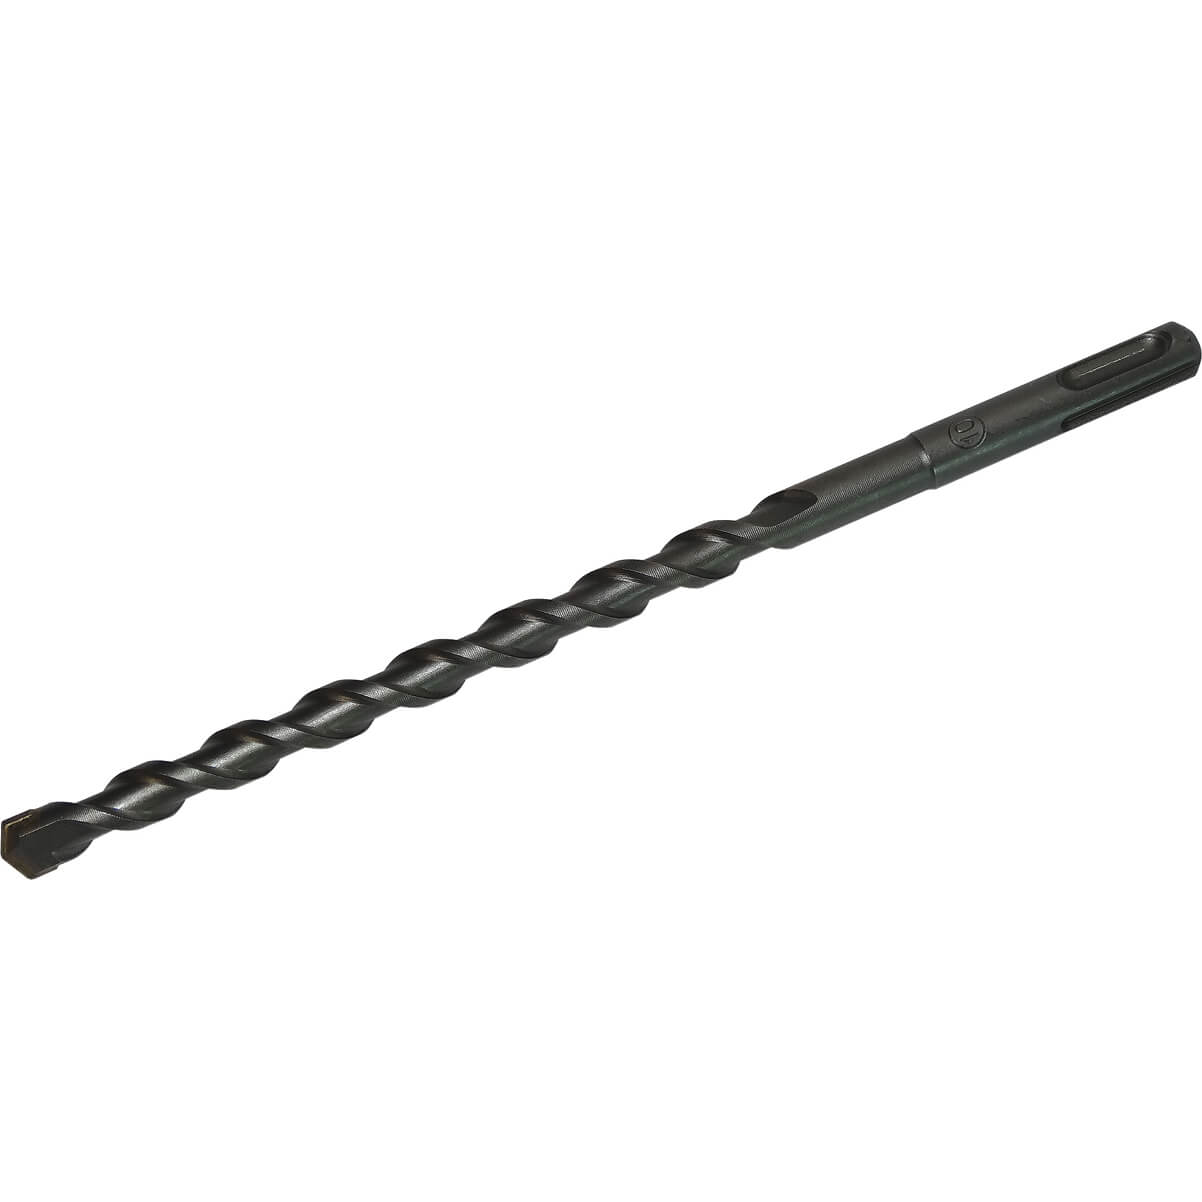 Image of CK SDS Plus Masonry Drill Bit 10mm 160mm Pack of 1